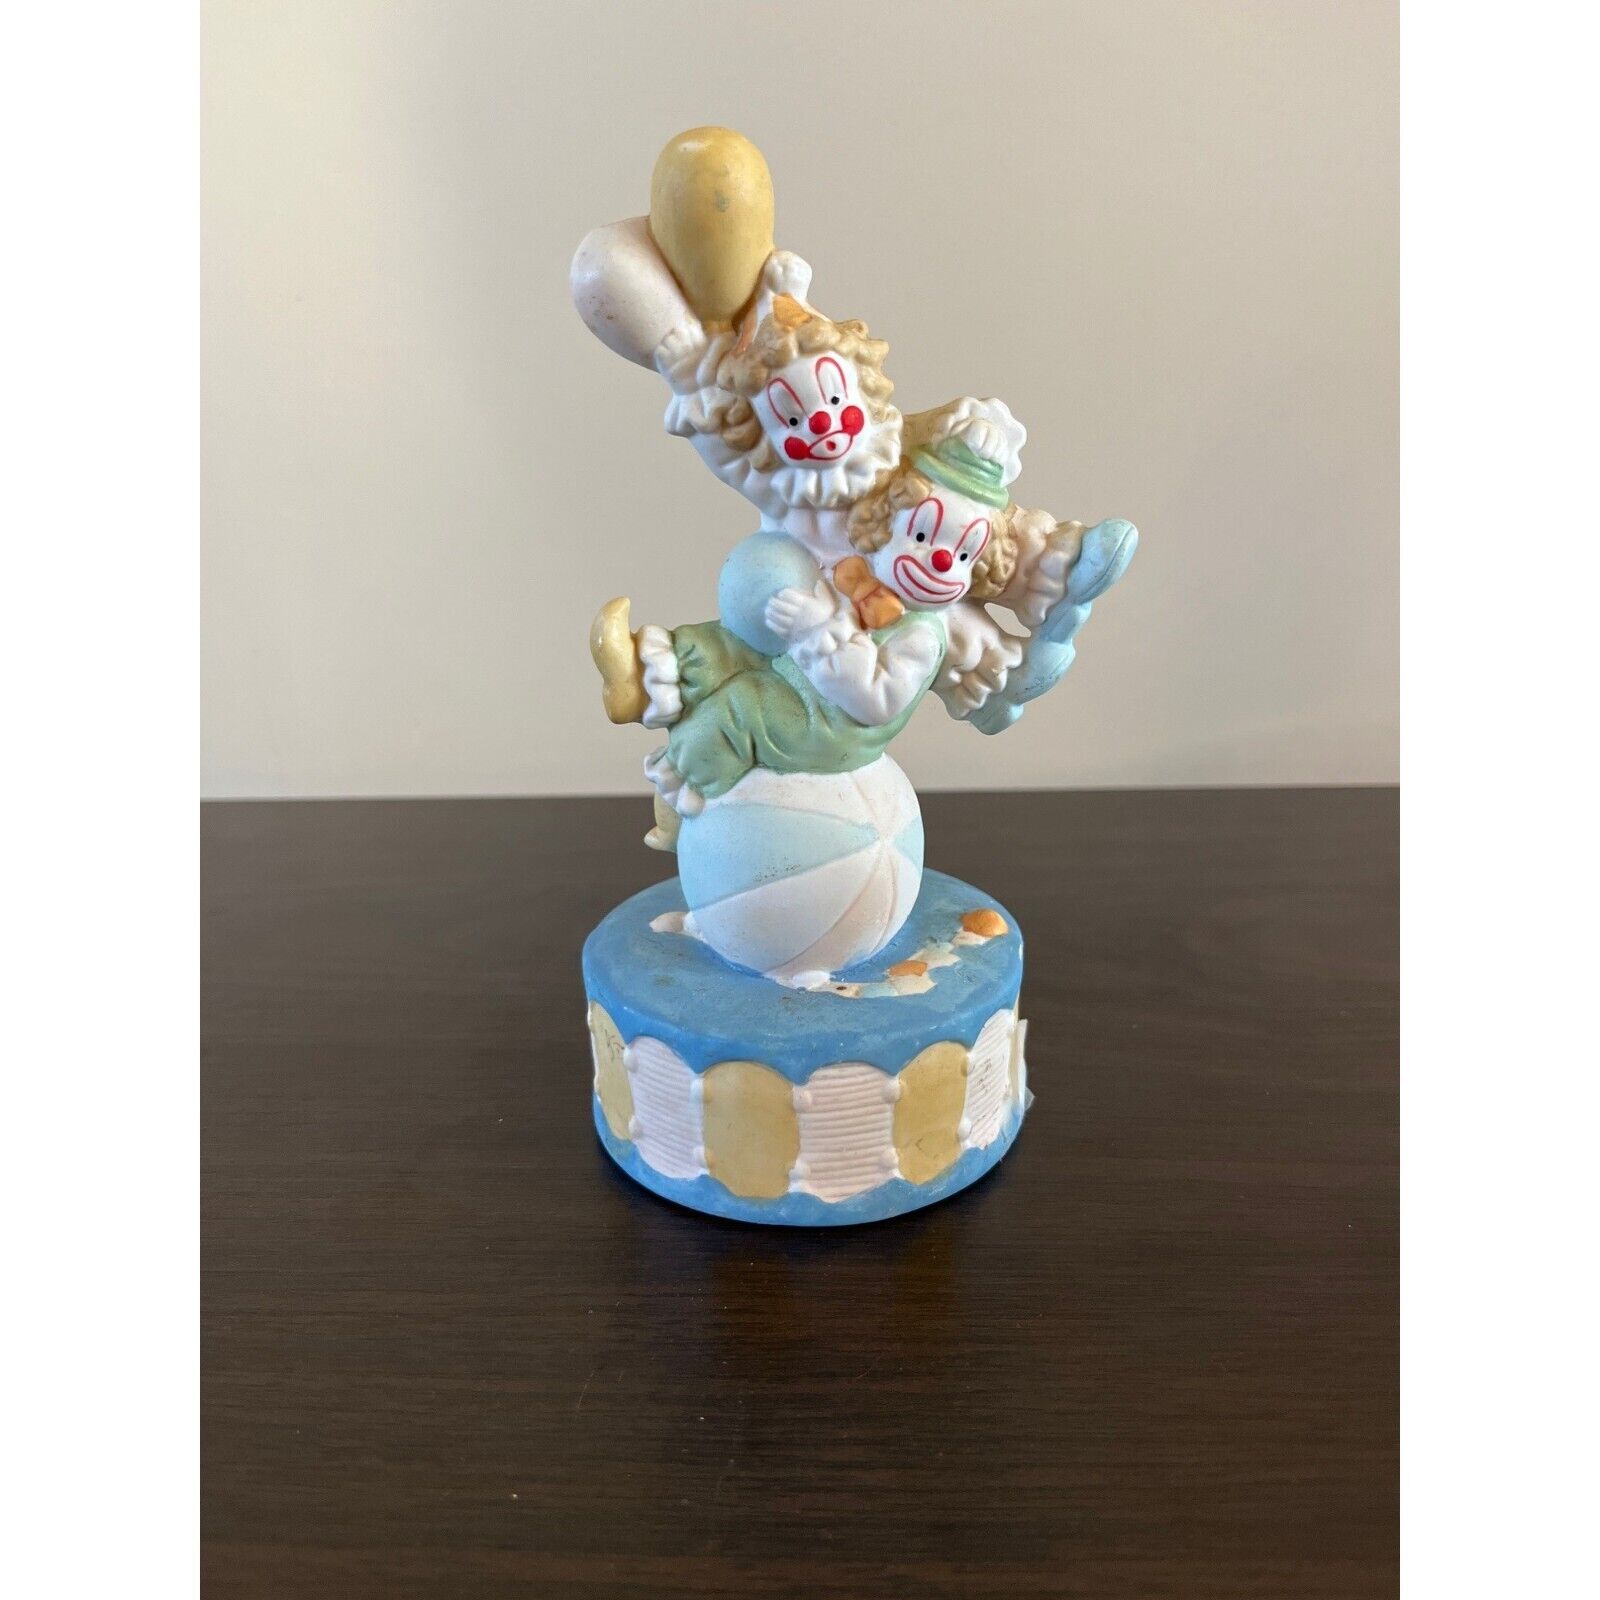 Acrobat Circus Clown Figurine Holding Balloons Sitting On Ball Multicolor